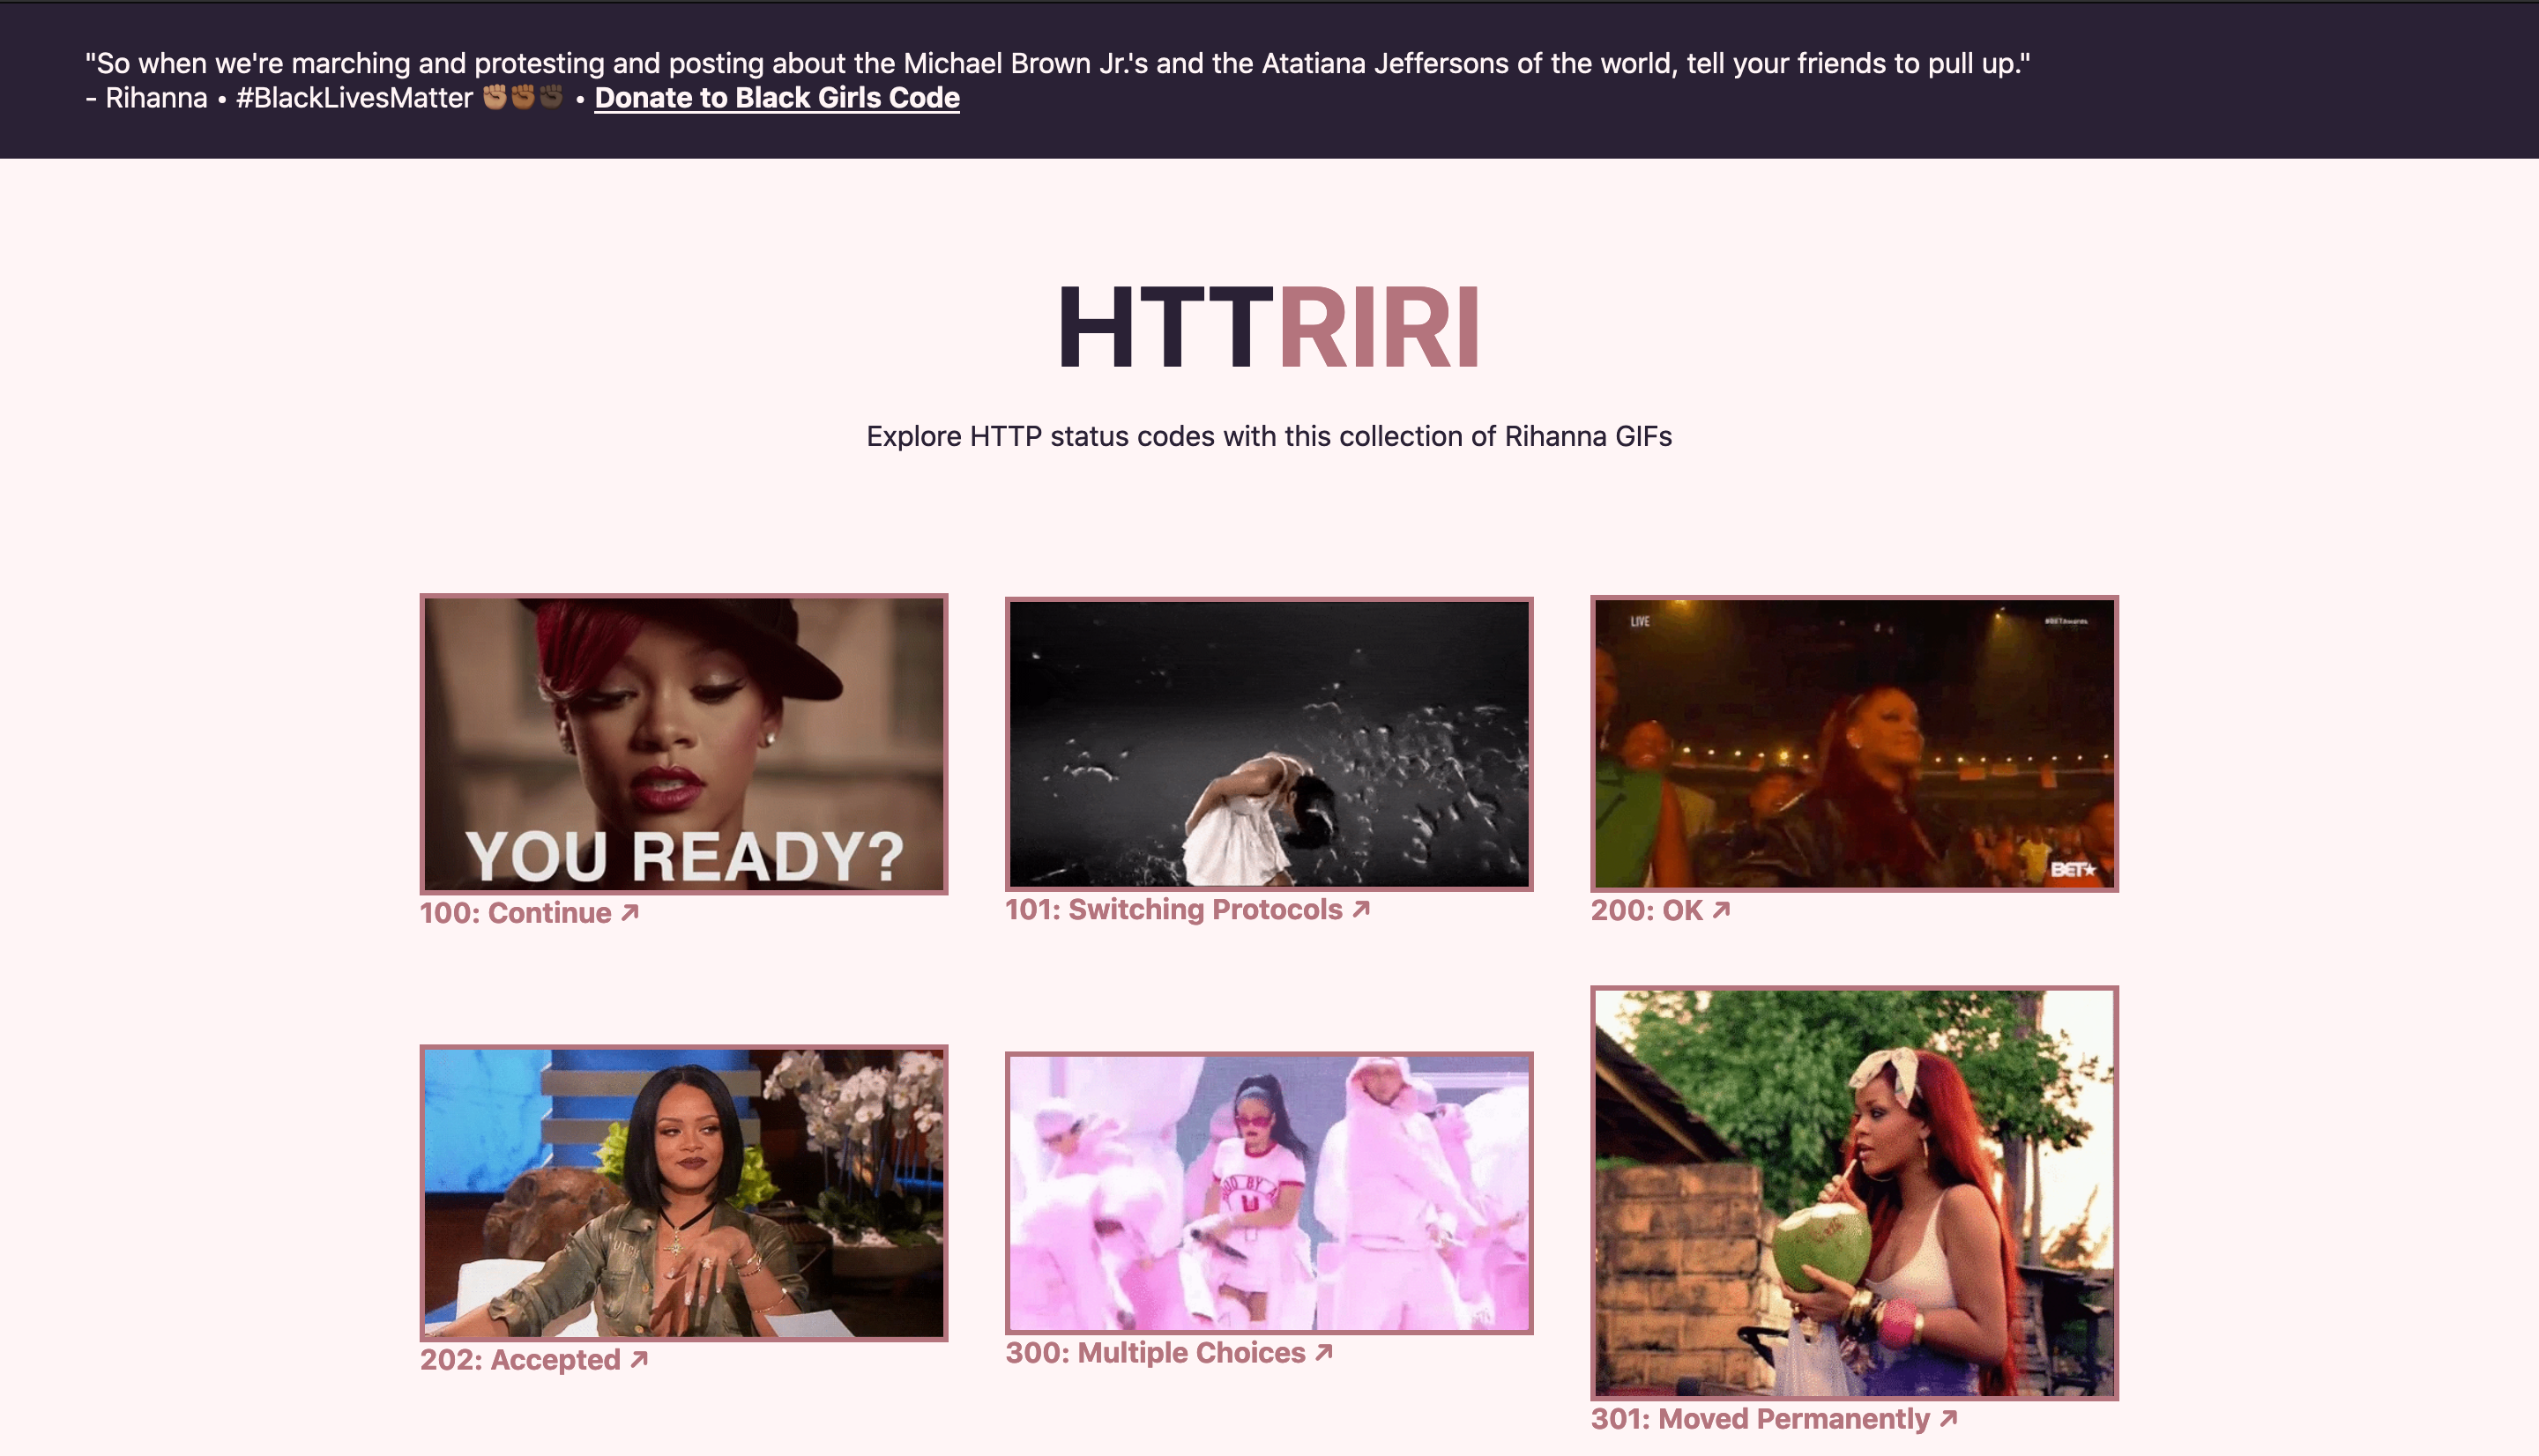 I created HTTRiRi for developers to explore common HTTP status codes through a collection of Rihanna GIFs. Each status code reference includes an link to a detailed description from httpstatuses.com.